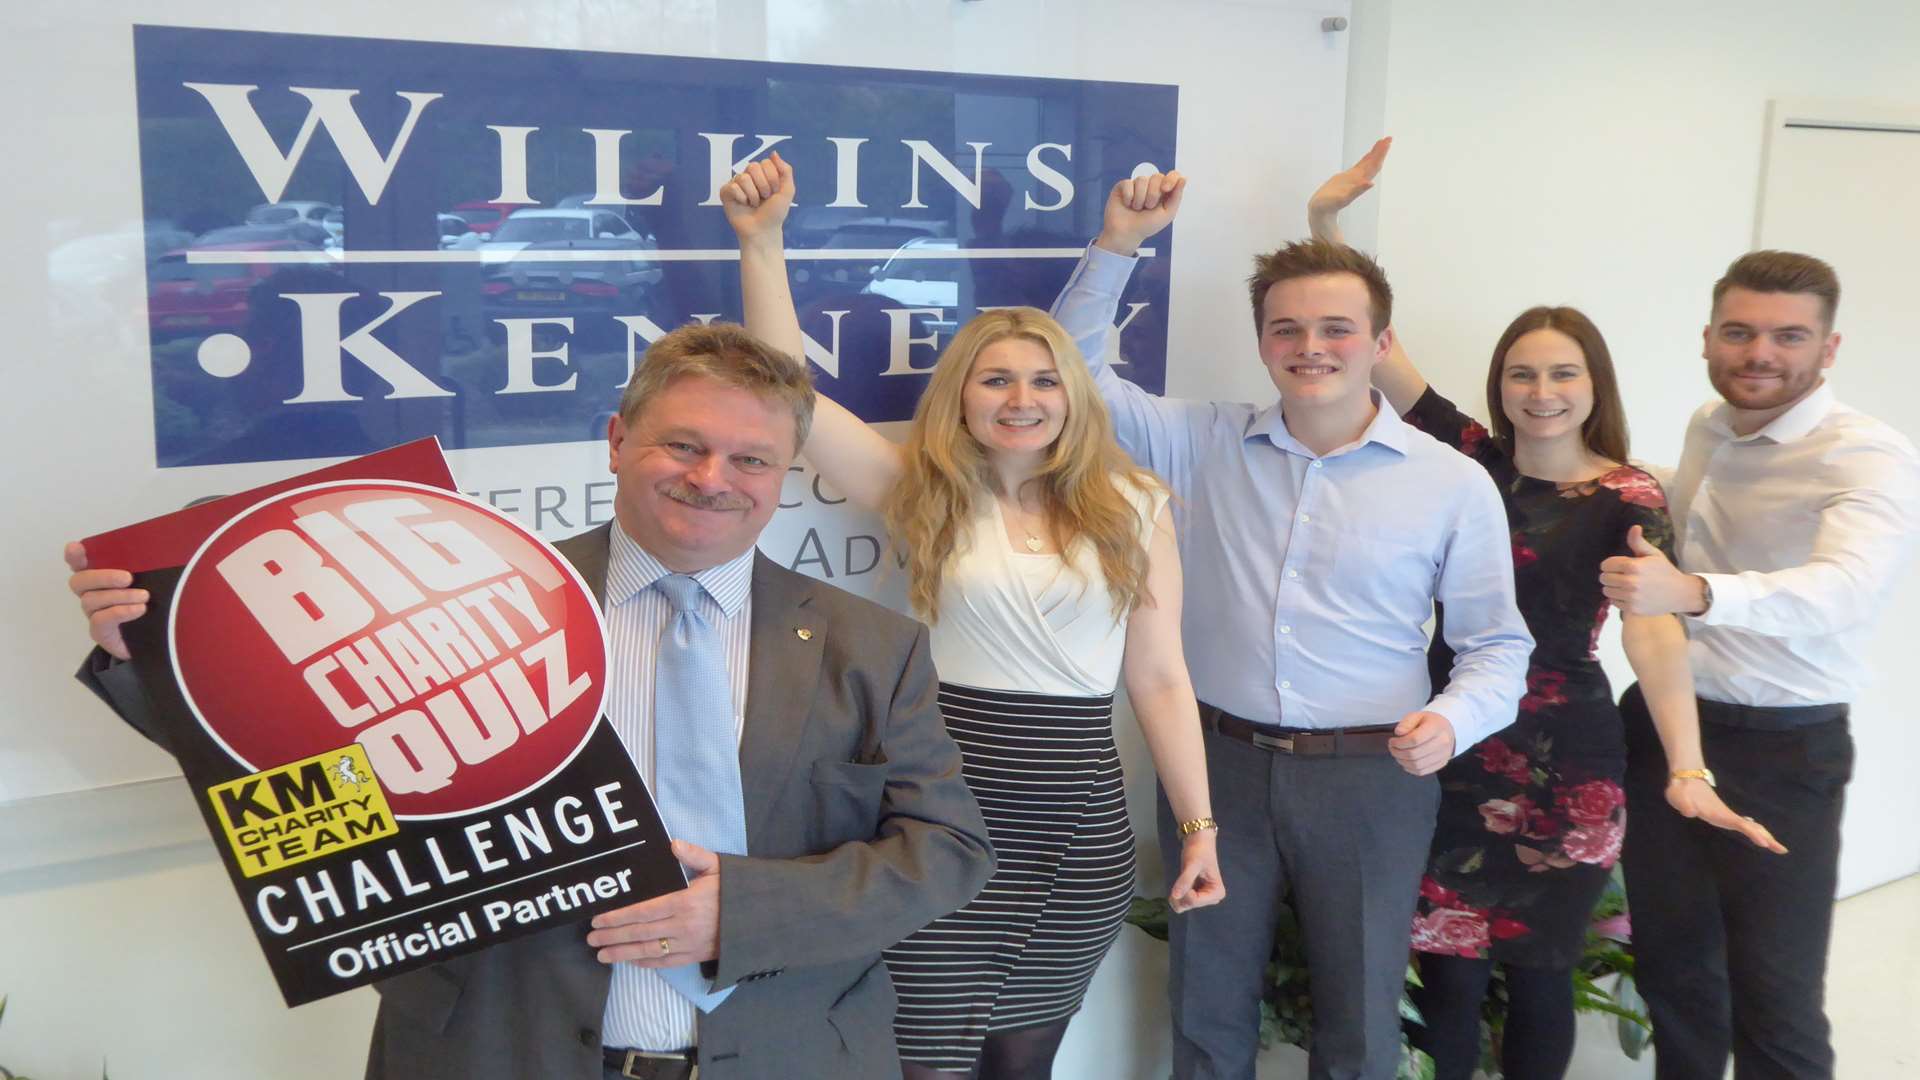 Mike Startup and the Wilkins Kennedy team are supporting the KM Big Charity Quiz in Maidstone.